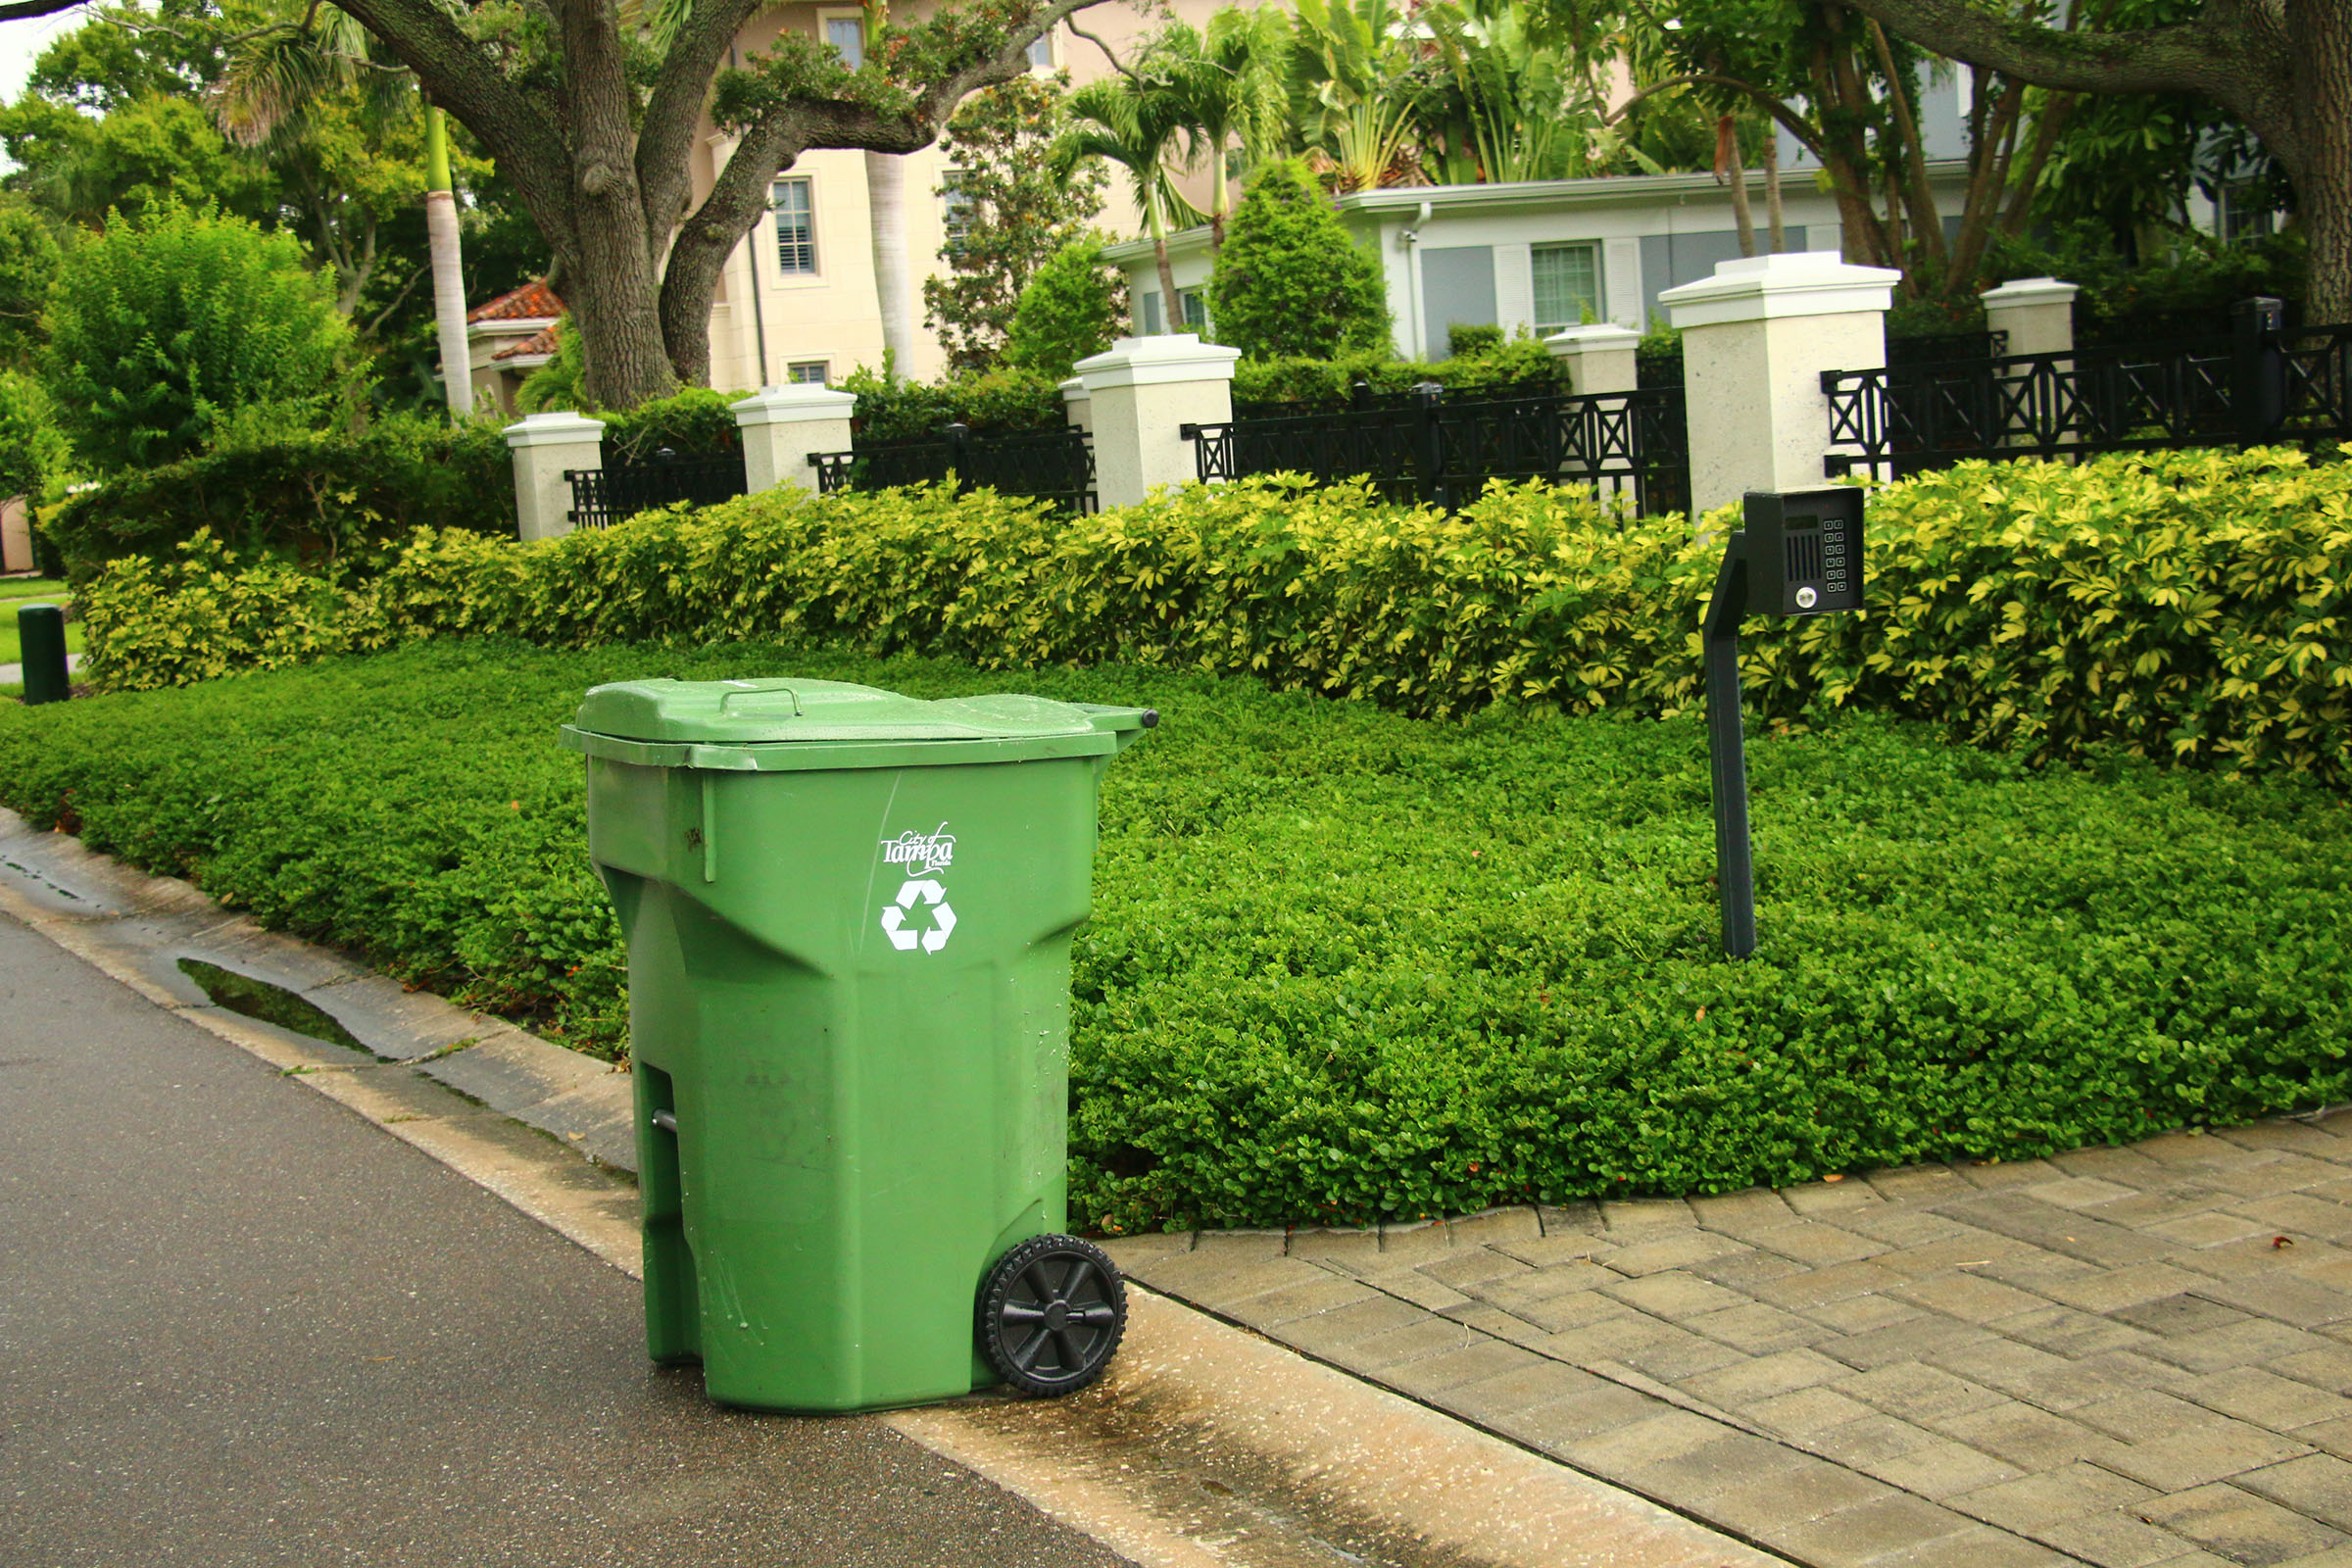 Recycling cart at the curb